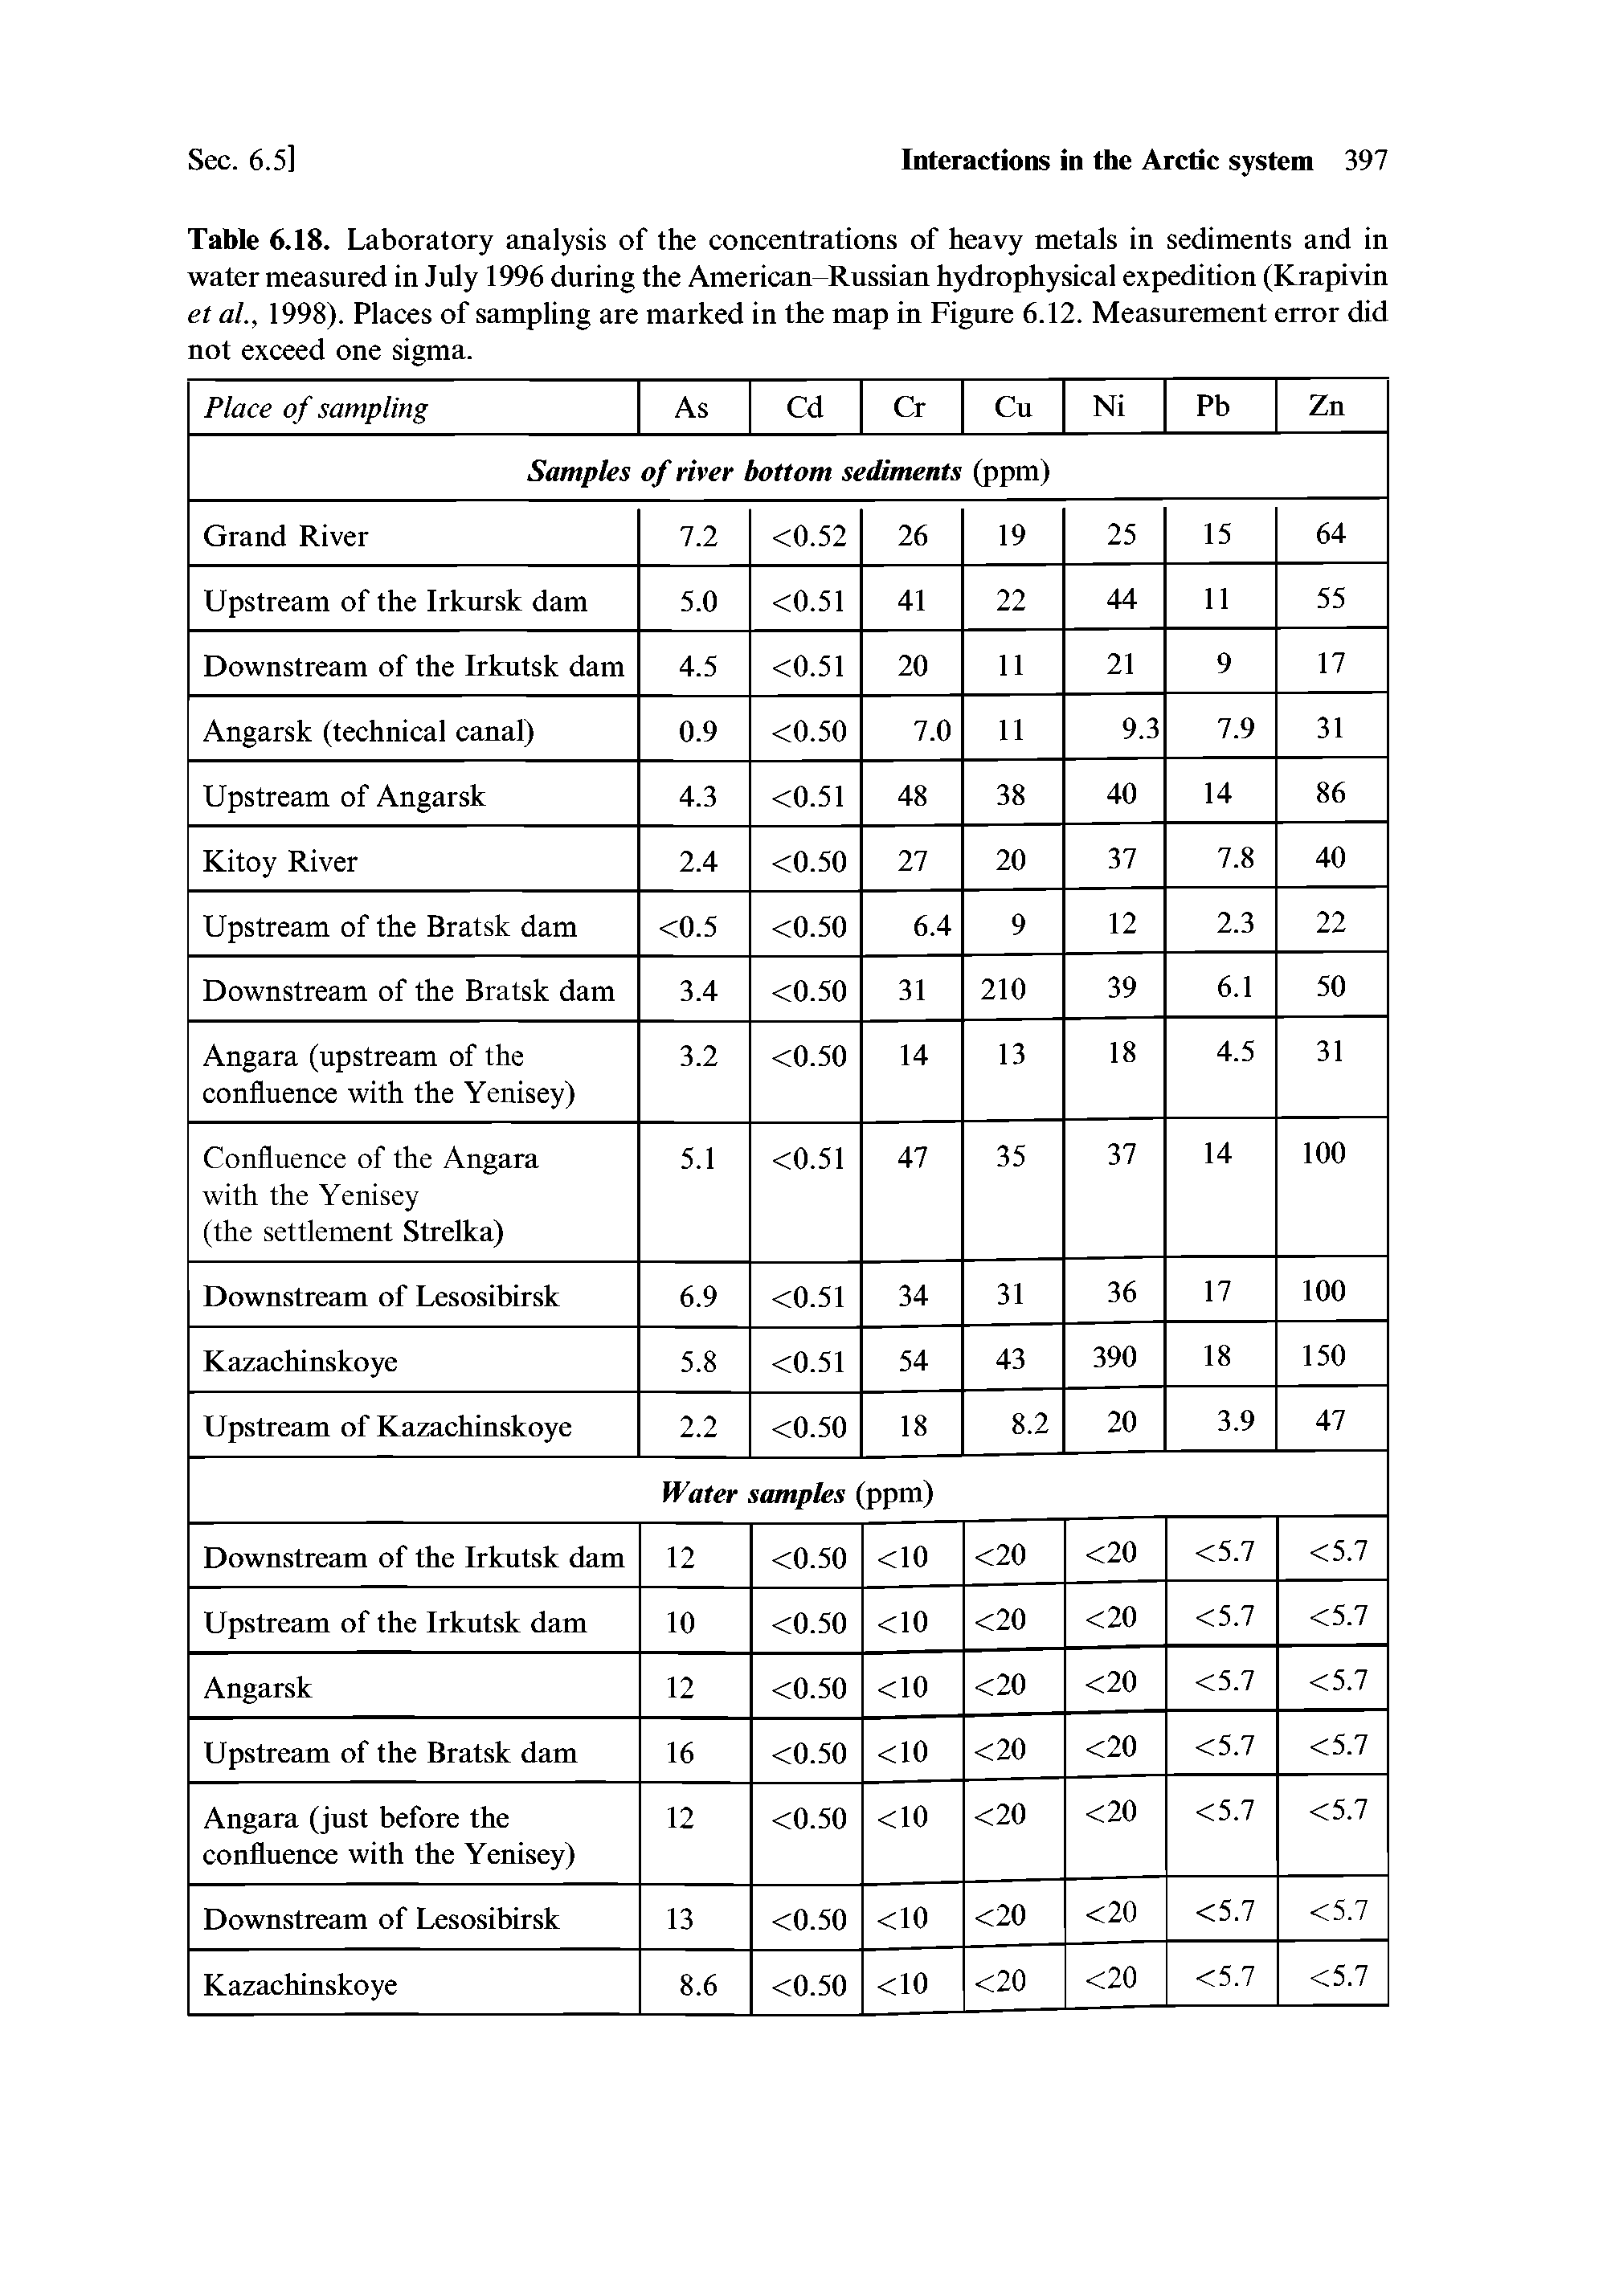 Table 6.18. Laboratory analysis of the concentrations of heavy metals in sediments and in water measured in July 1996 during the American-Russian hydrophysical expedition (Krapivin et al., 1998). Places of sampling are marked in the map in Figure 6.12. Measurement error did not exceed one sigma.